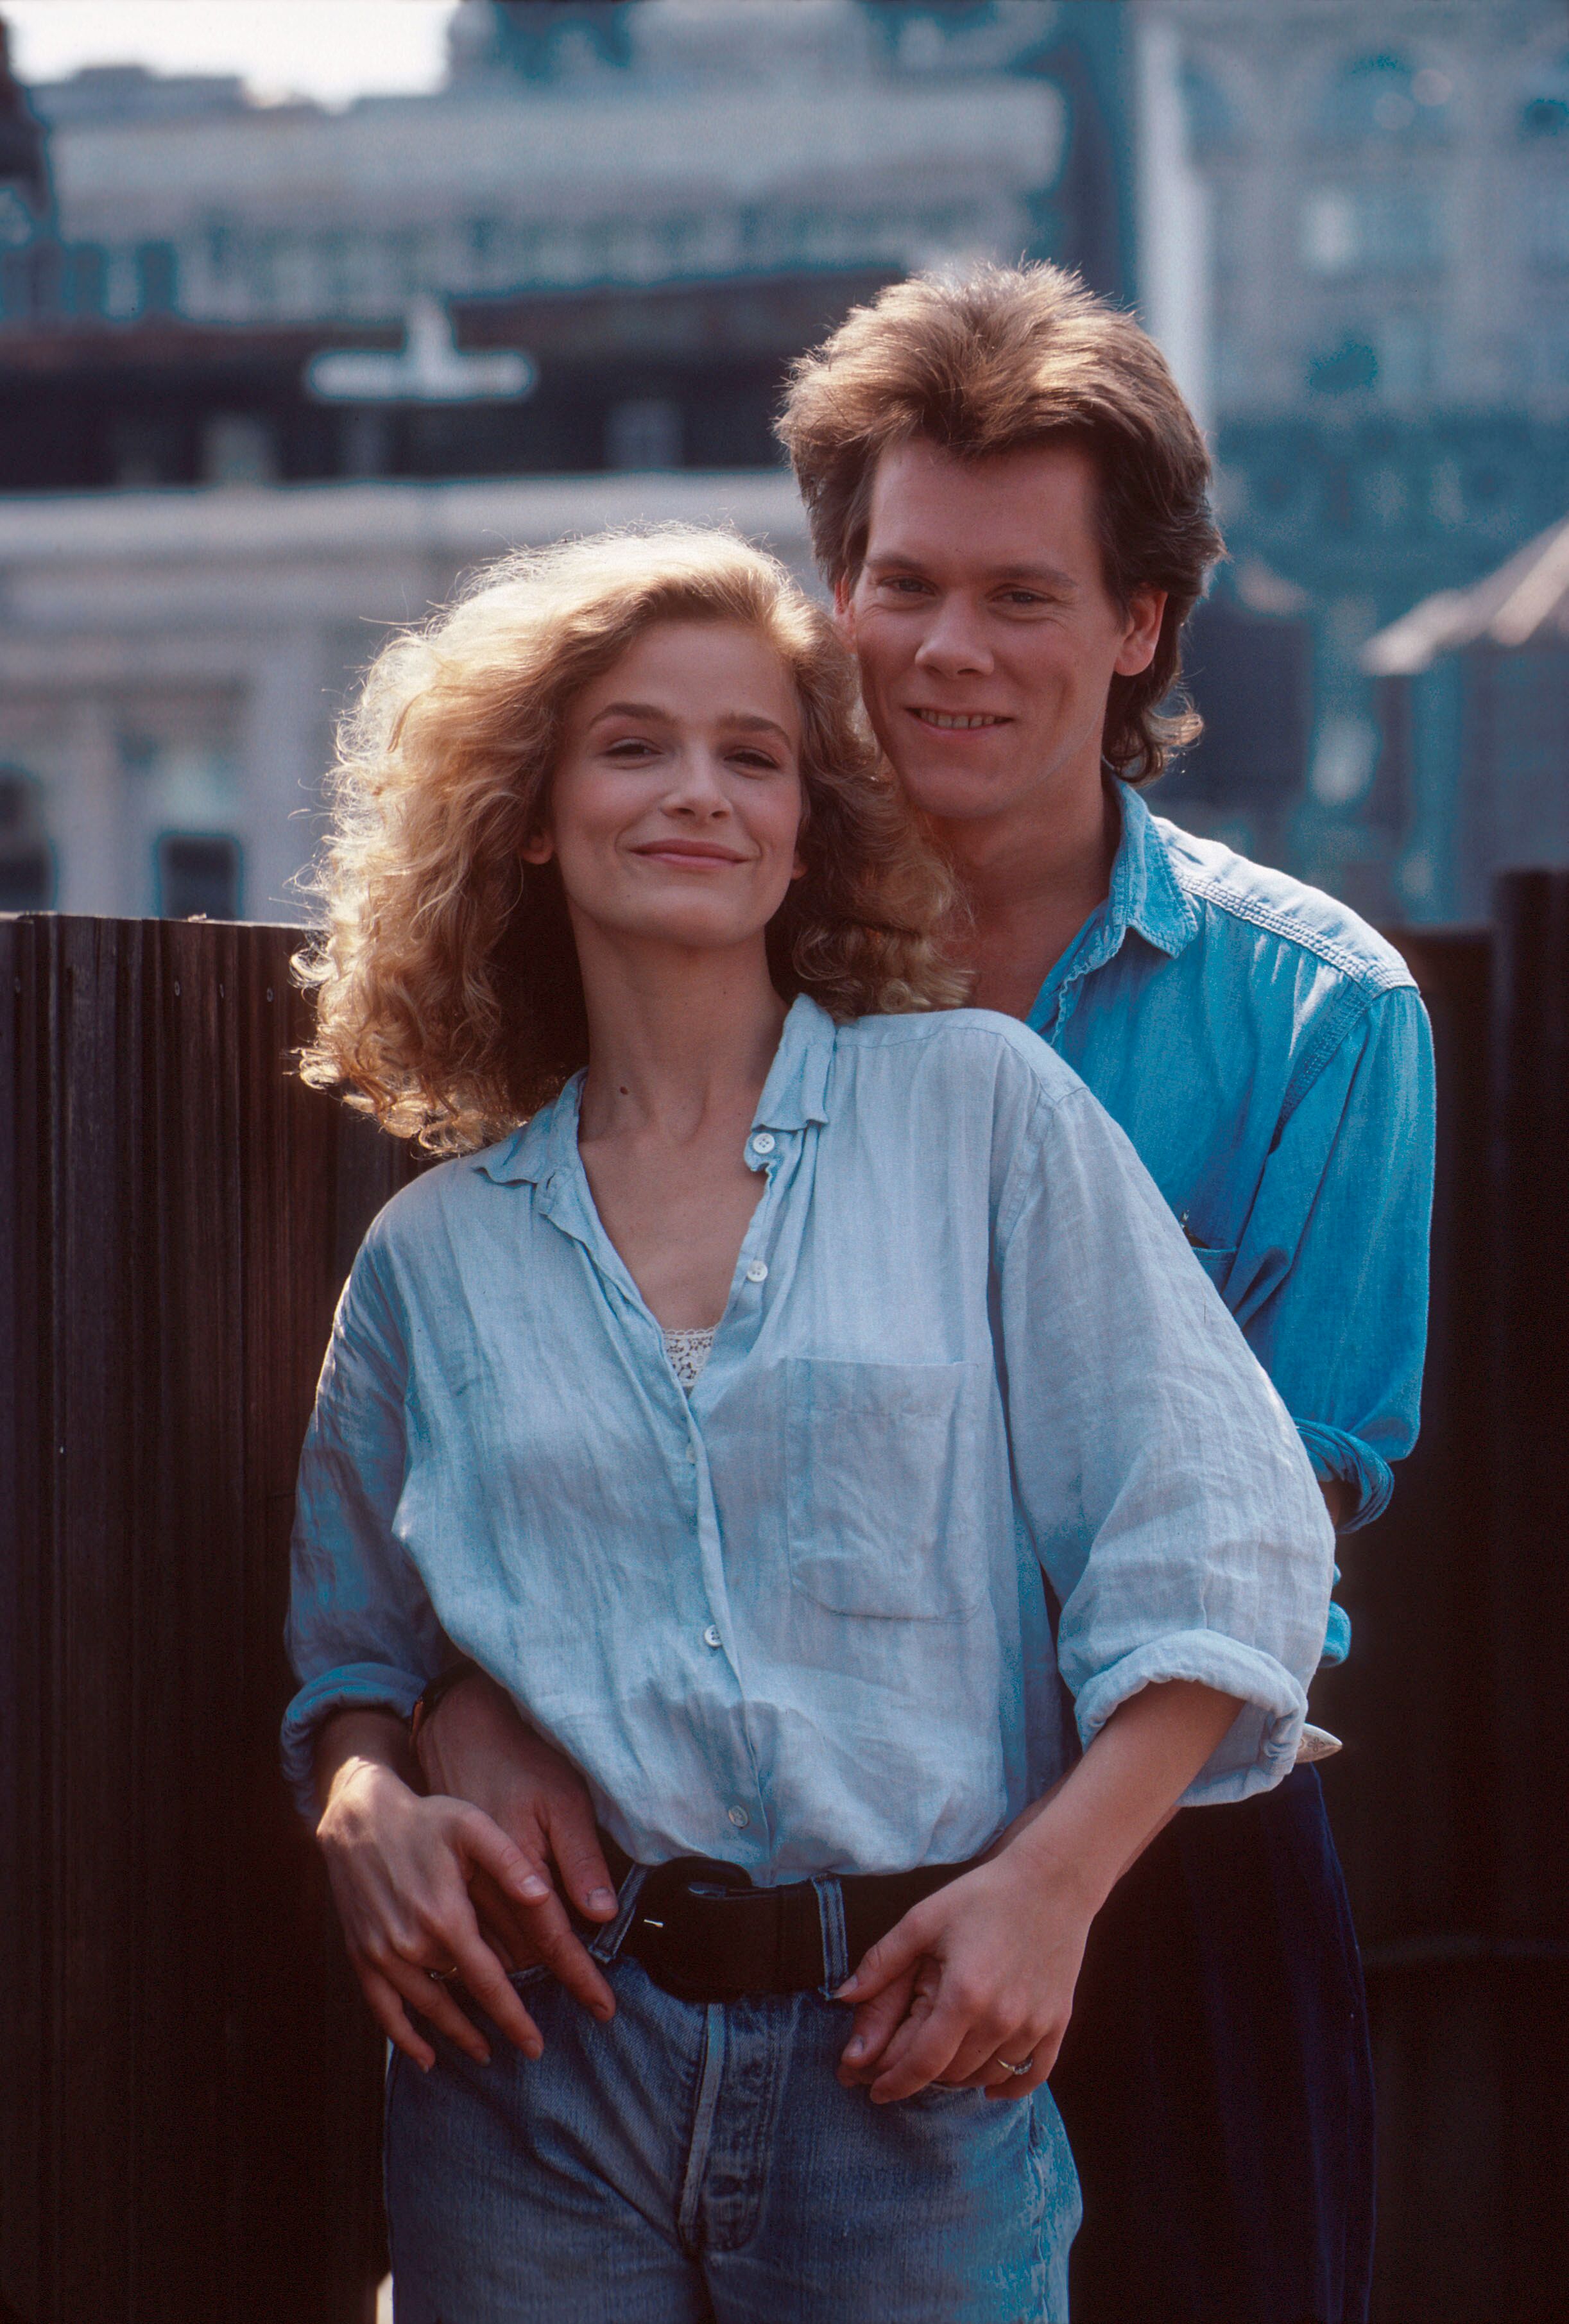 Kevin Bacon with Kyra Sedgwick on photo shoot in New York in 1988 | Getty Images